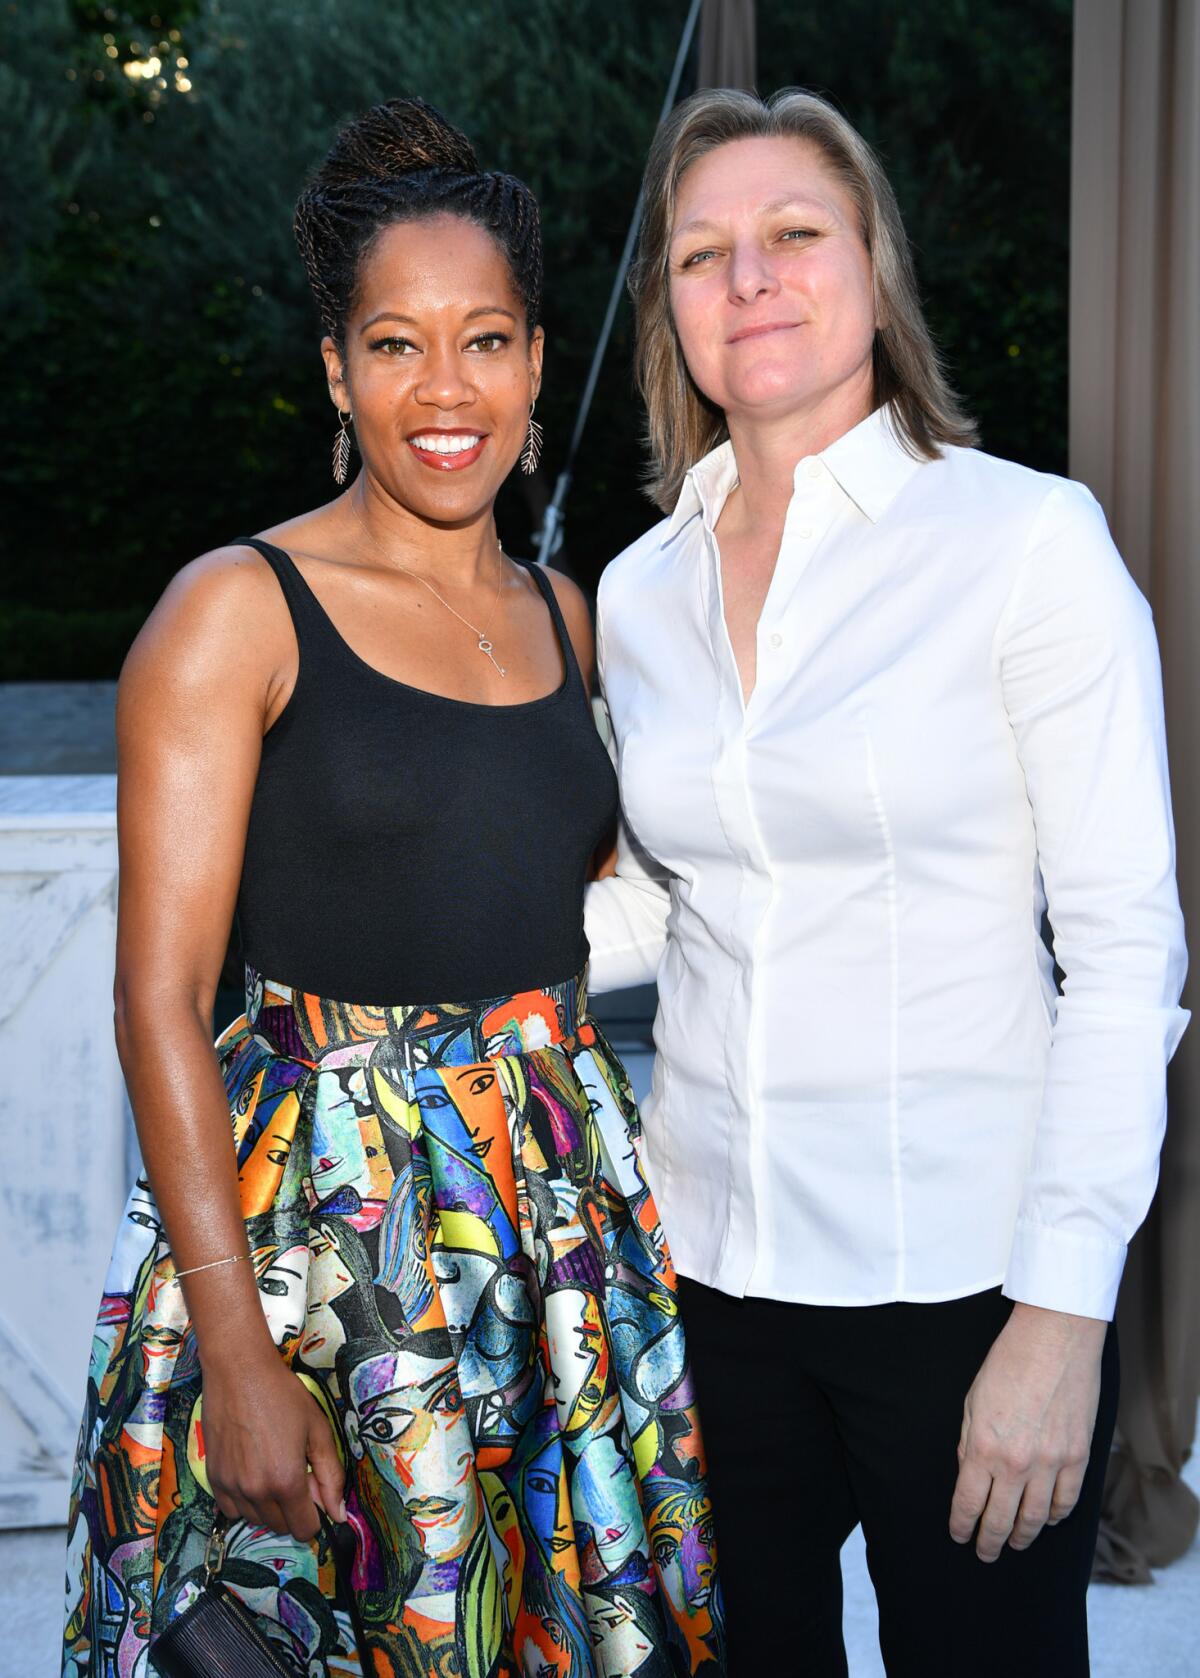 Emmy winner Regina King and Netflix Vice President of Original Series Cindy Holland attend a pre-Emmy party Saturday.